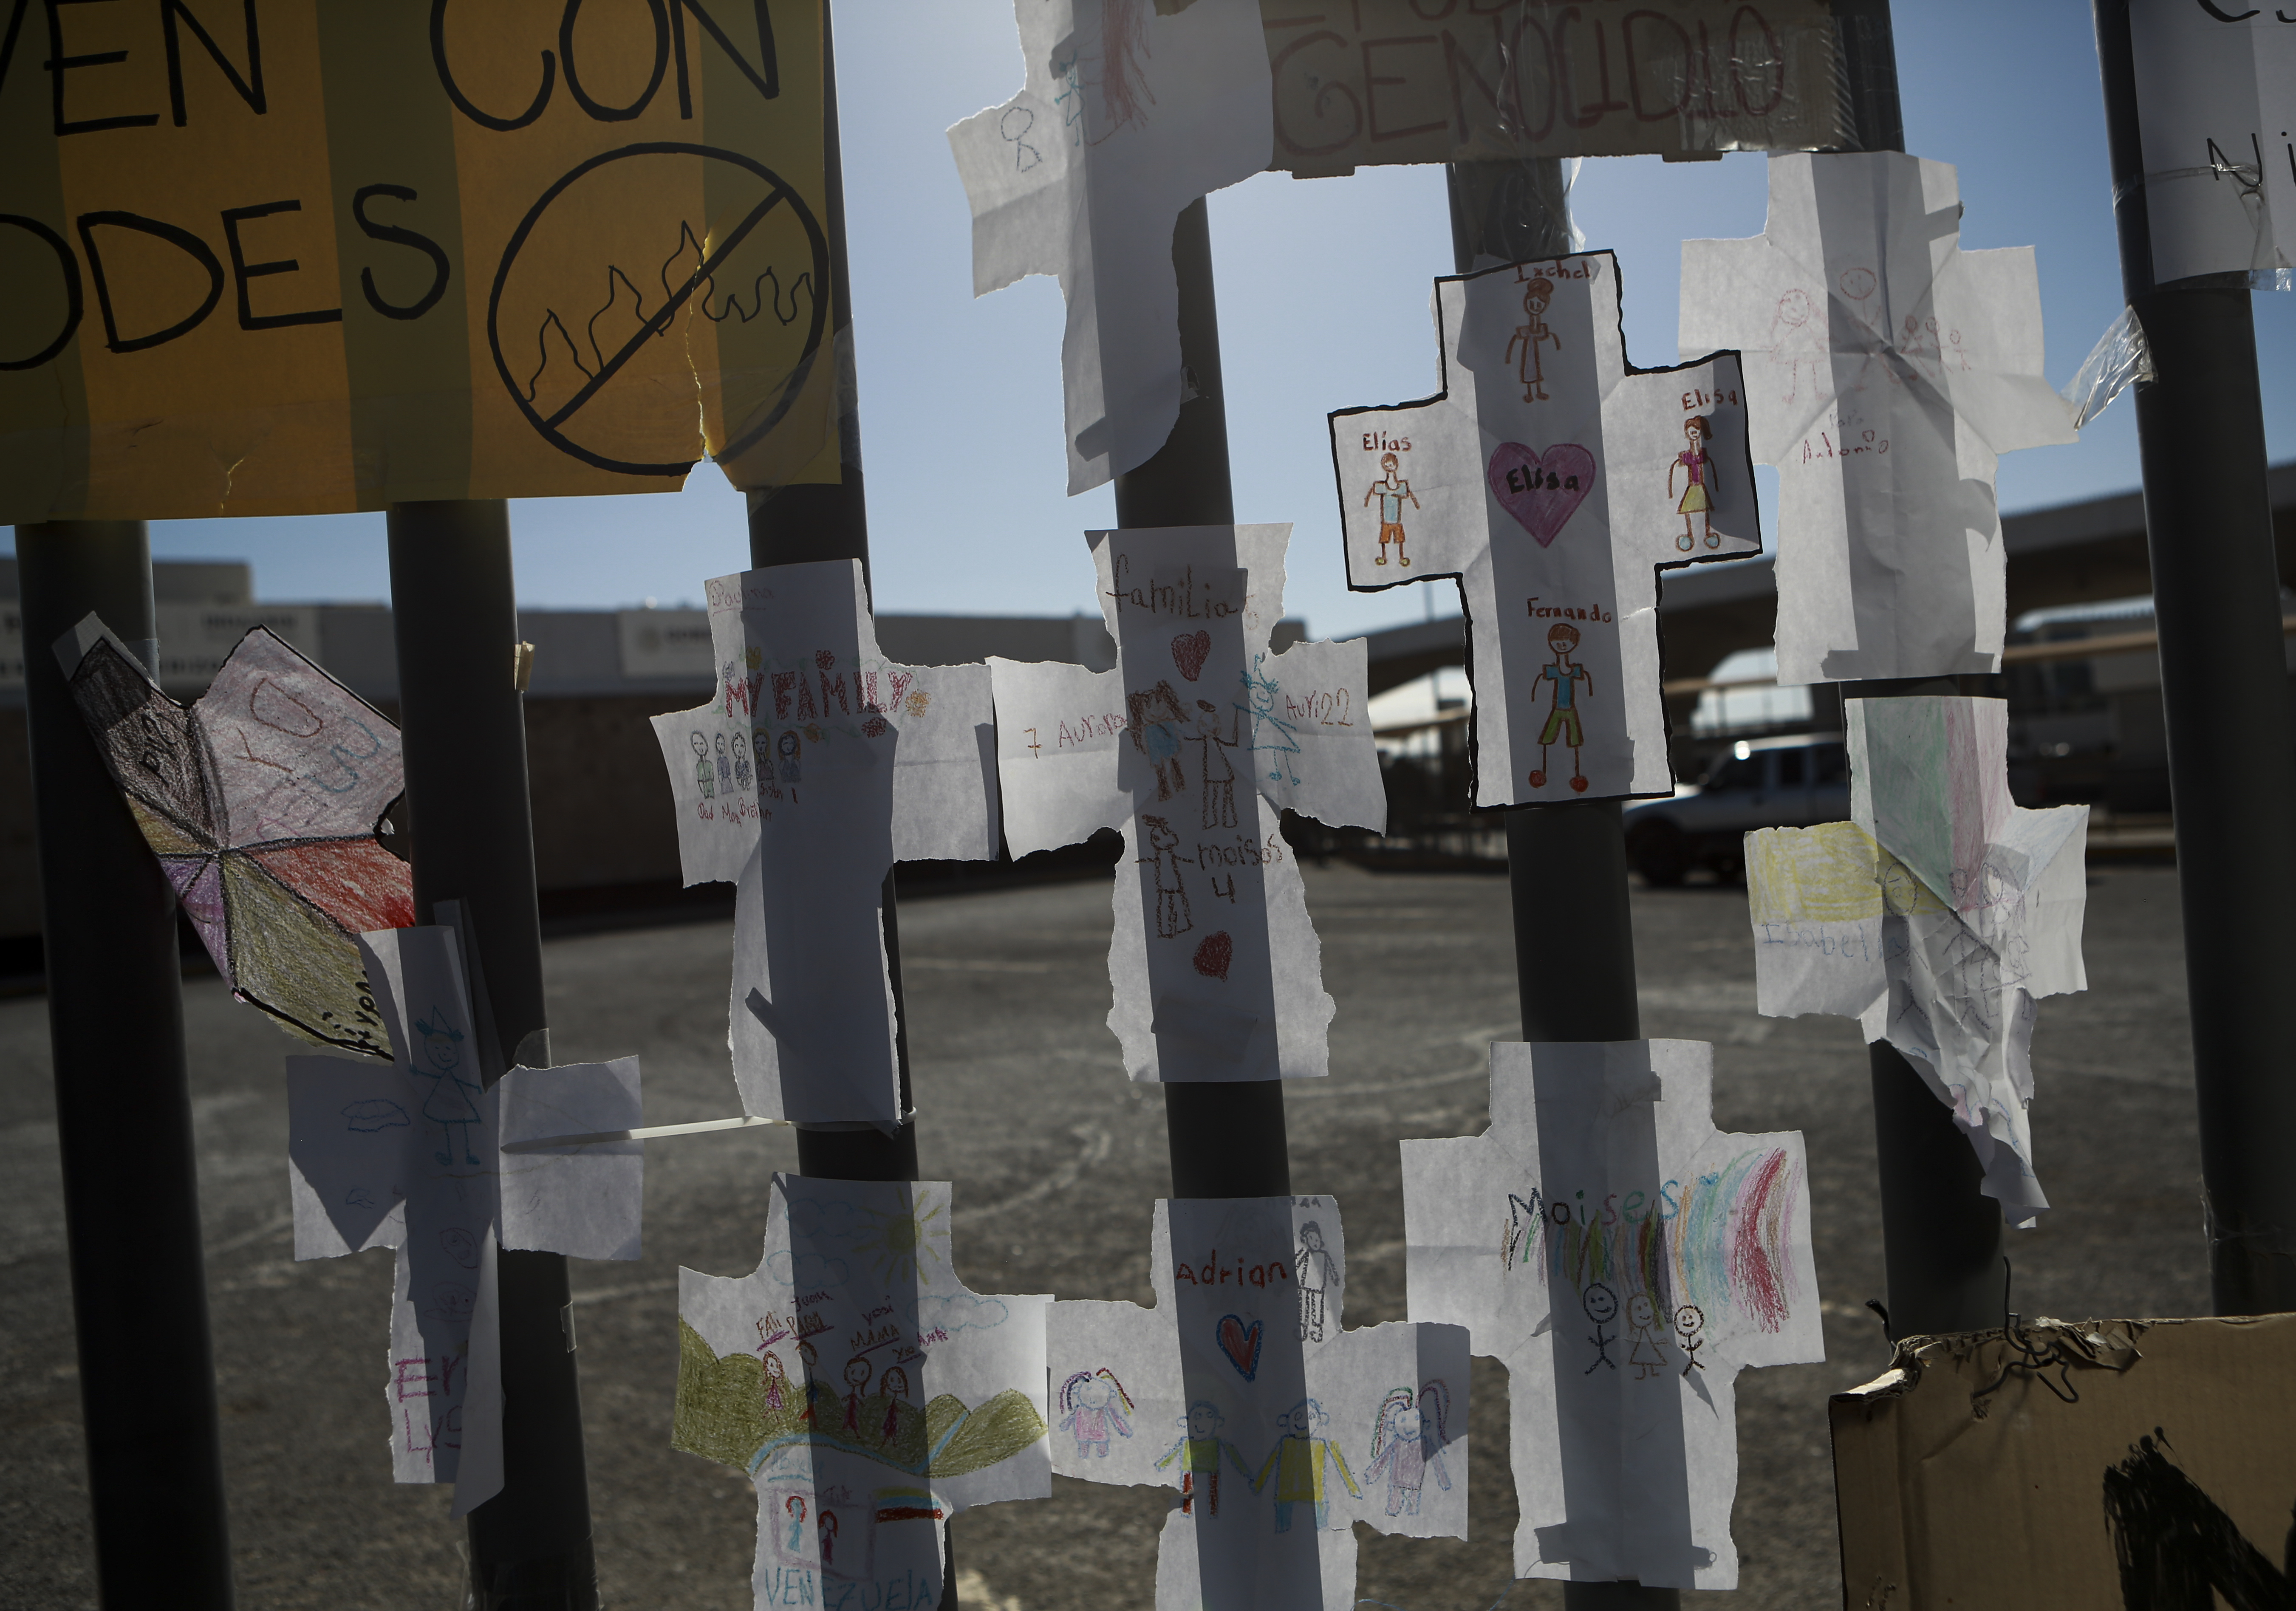 Paper crosses with the names of the migrants who died in last month's fire are taped to a fence at the migrant detention center where more than three dozen people died from a fire that started in one of the cells, in Ciudad Juárez, Mexico, on Thursday, April 20, 2023. (AP Photo/Christian Chávez)